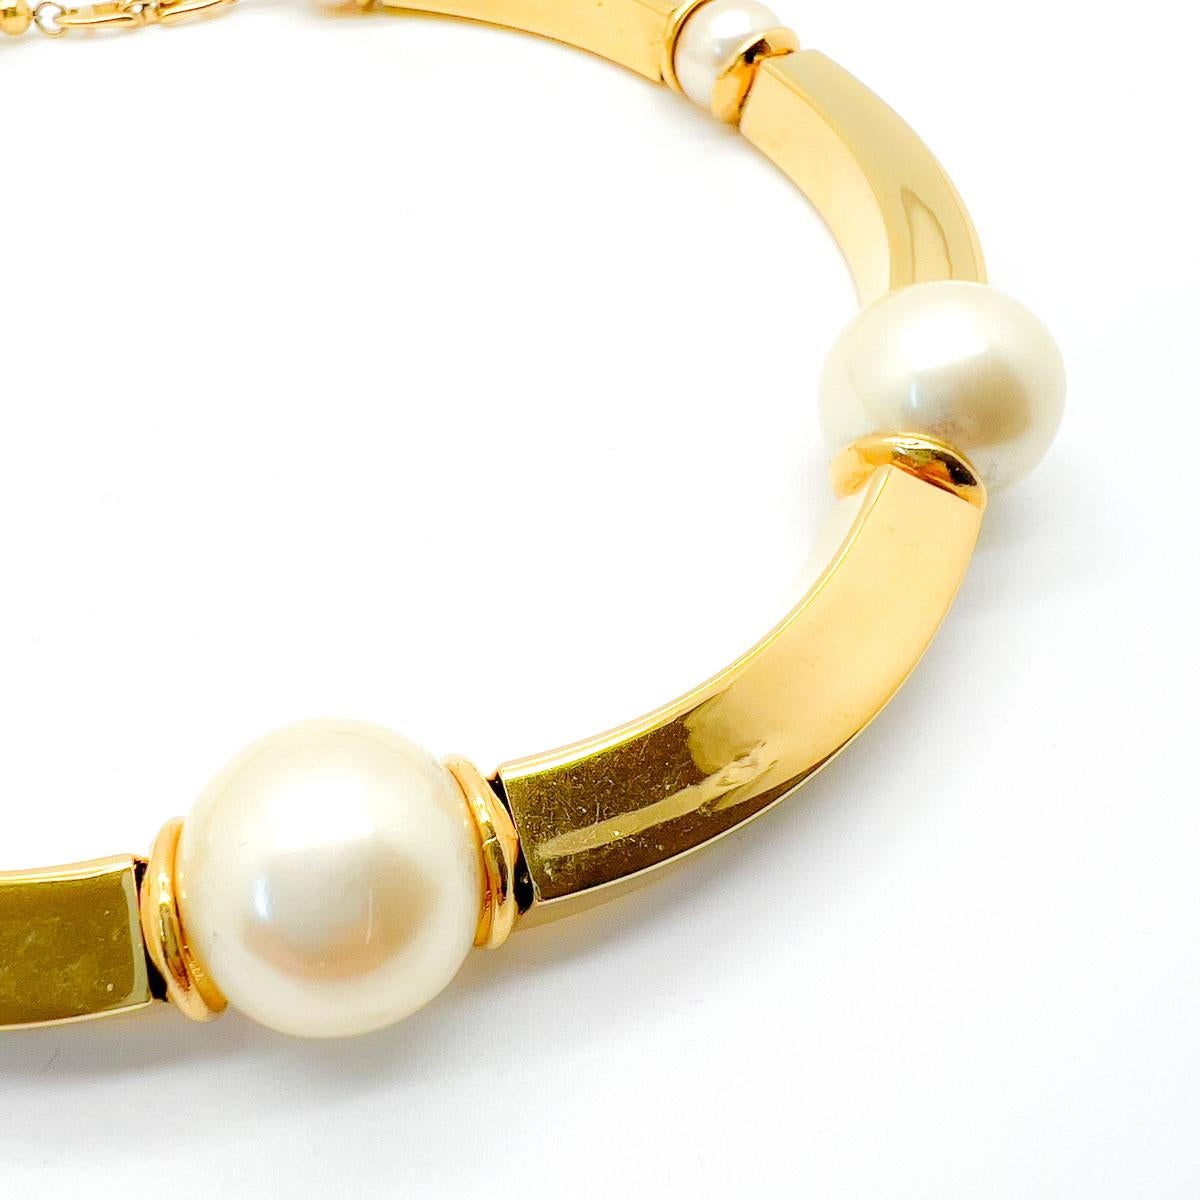 A fabulous Vintage Napier Pearl Collar. Bold gold curved bars interspersed with huge faux pearls. Timeless yet edgy. An absolute find from the House of Napier. The Napier Jewellery Company can trace its origins back to the 1880s. Always at the